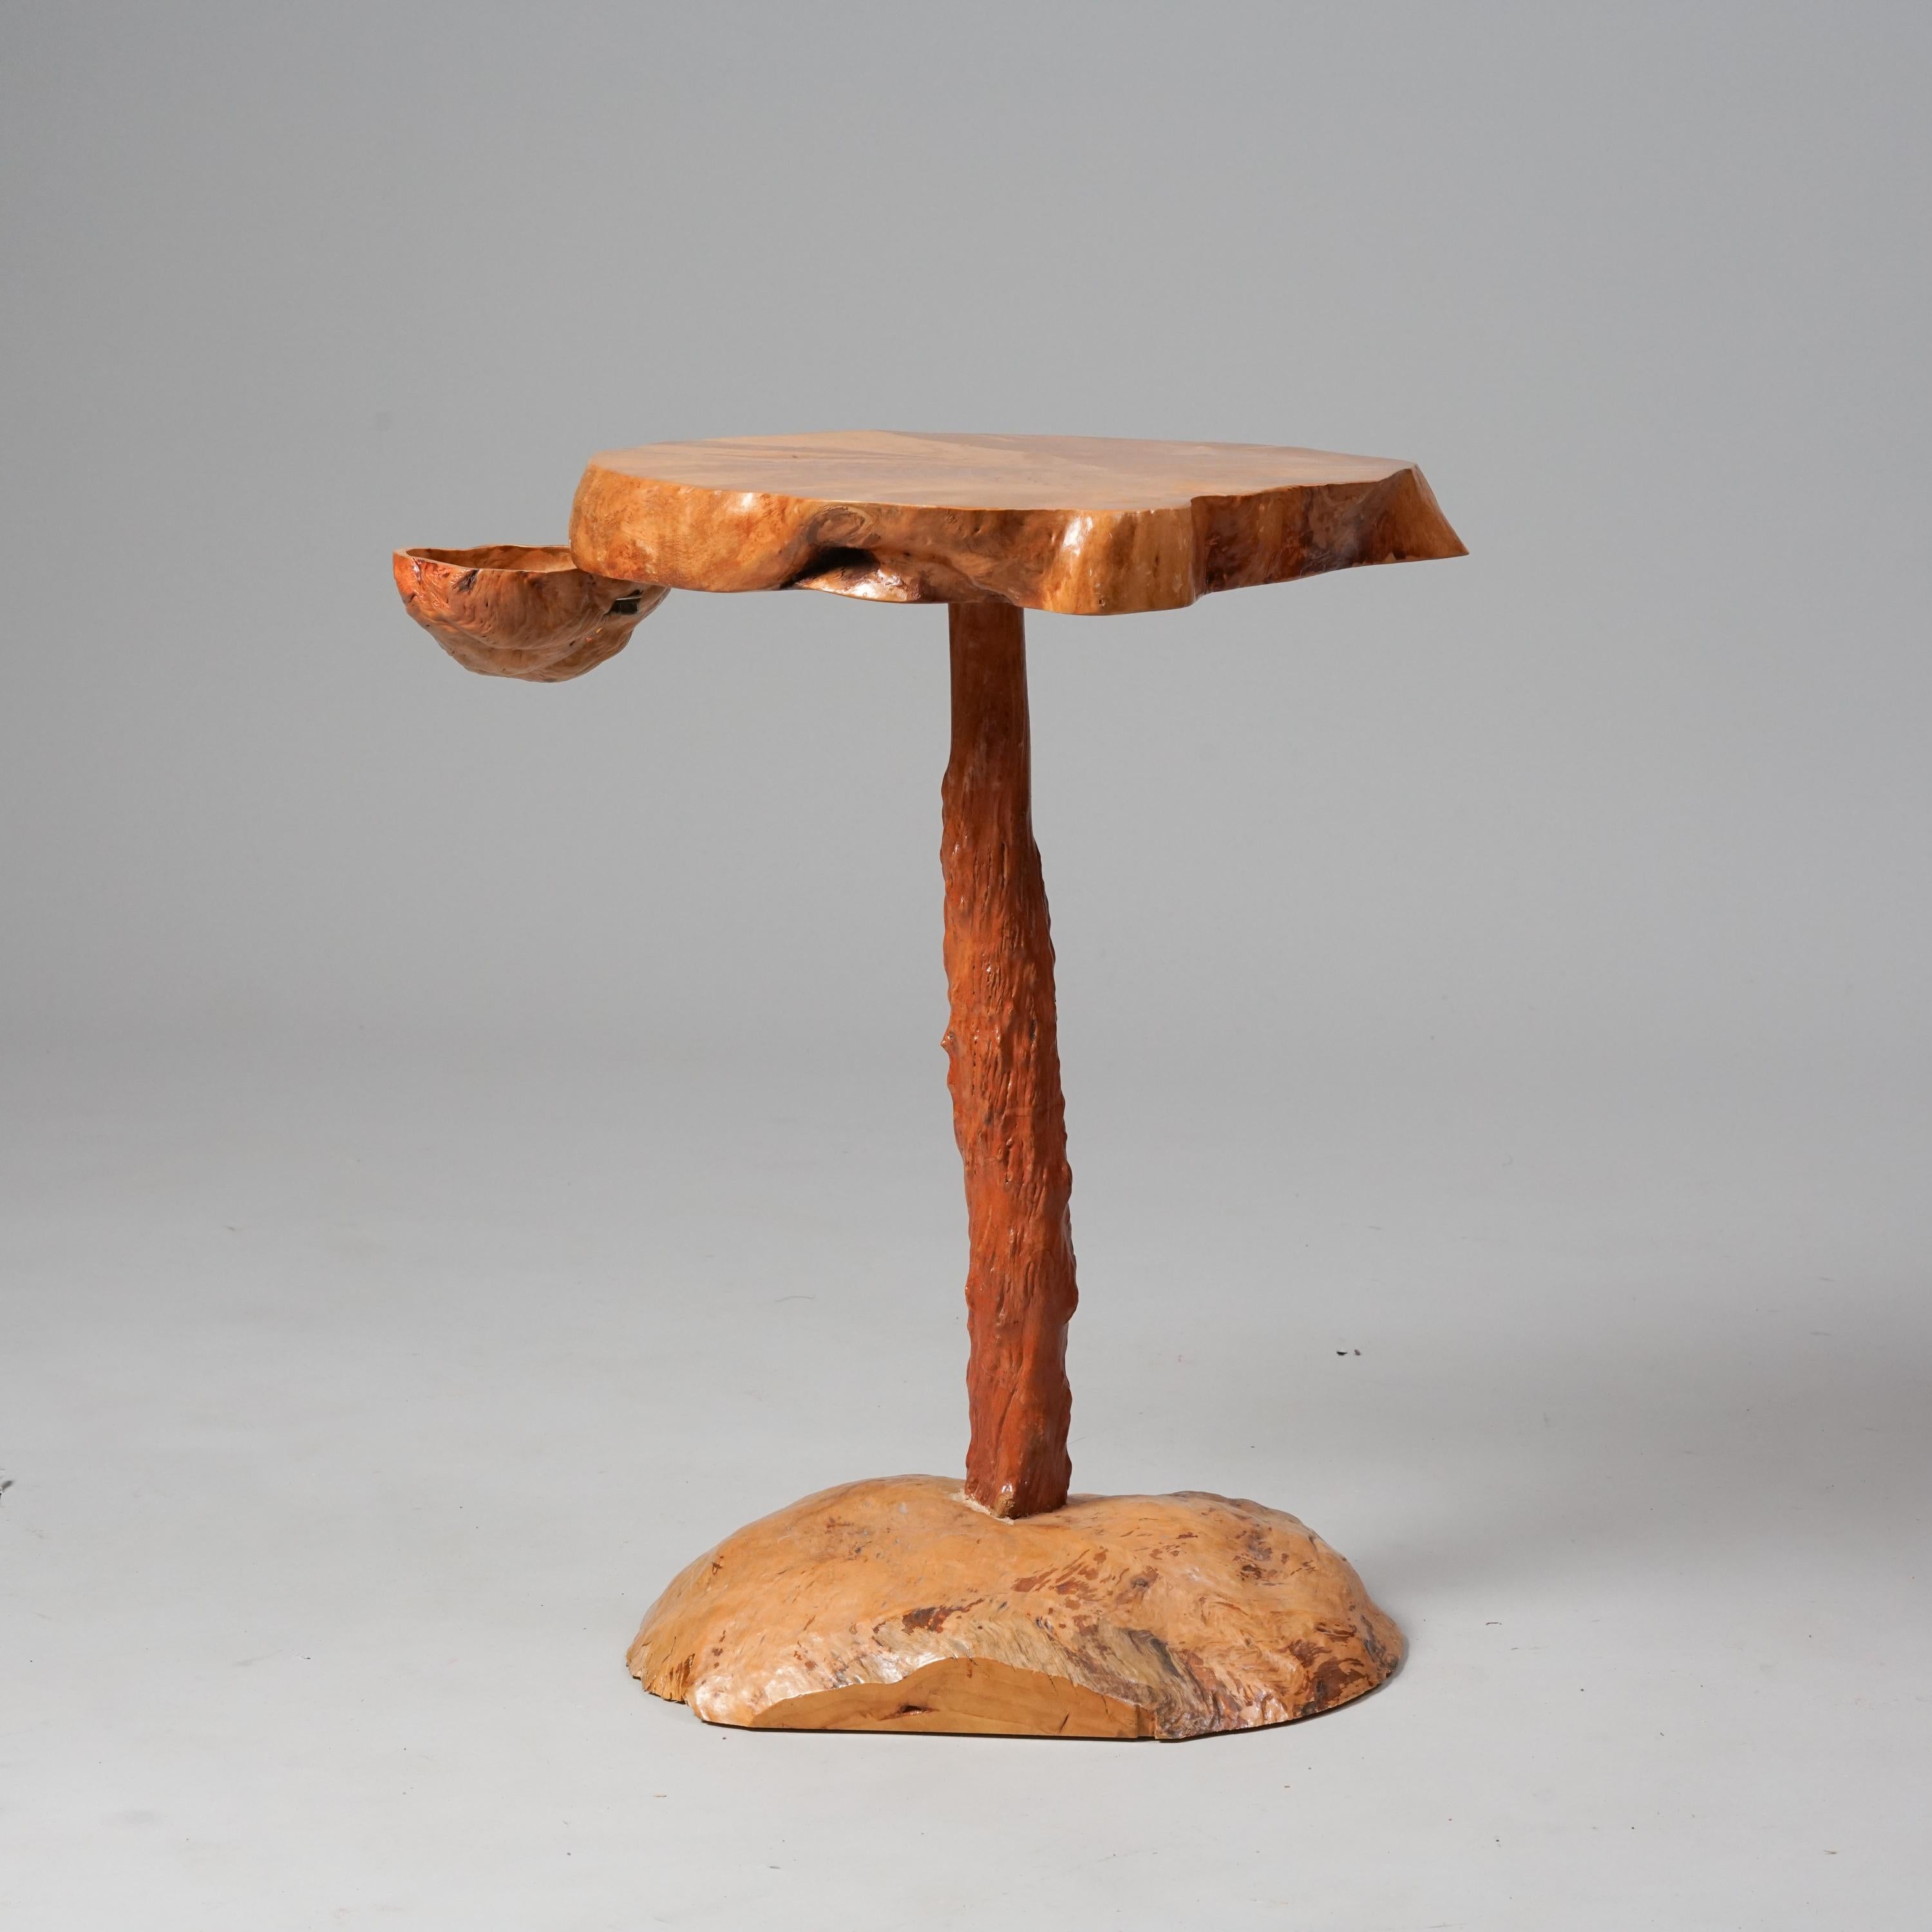 Burl table from the Mid 20th Century. Swivel cup underneath the table top. Good vintage condition, minor patina consistent with age and use. Unique design.